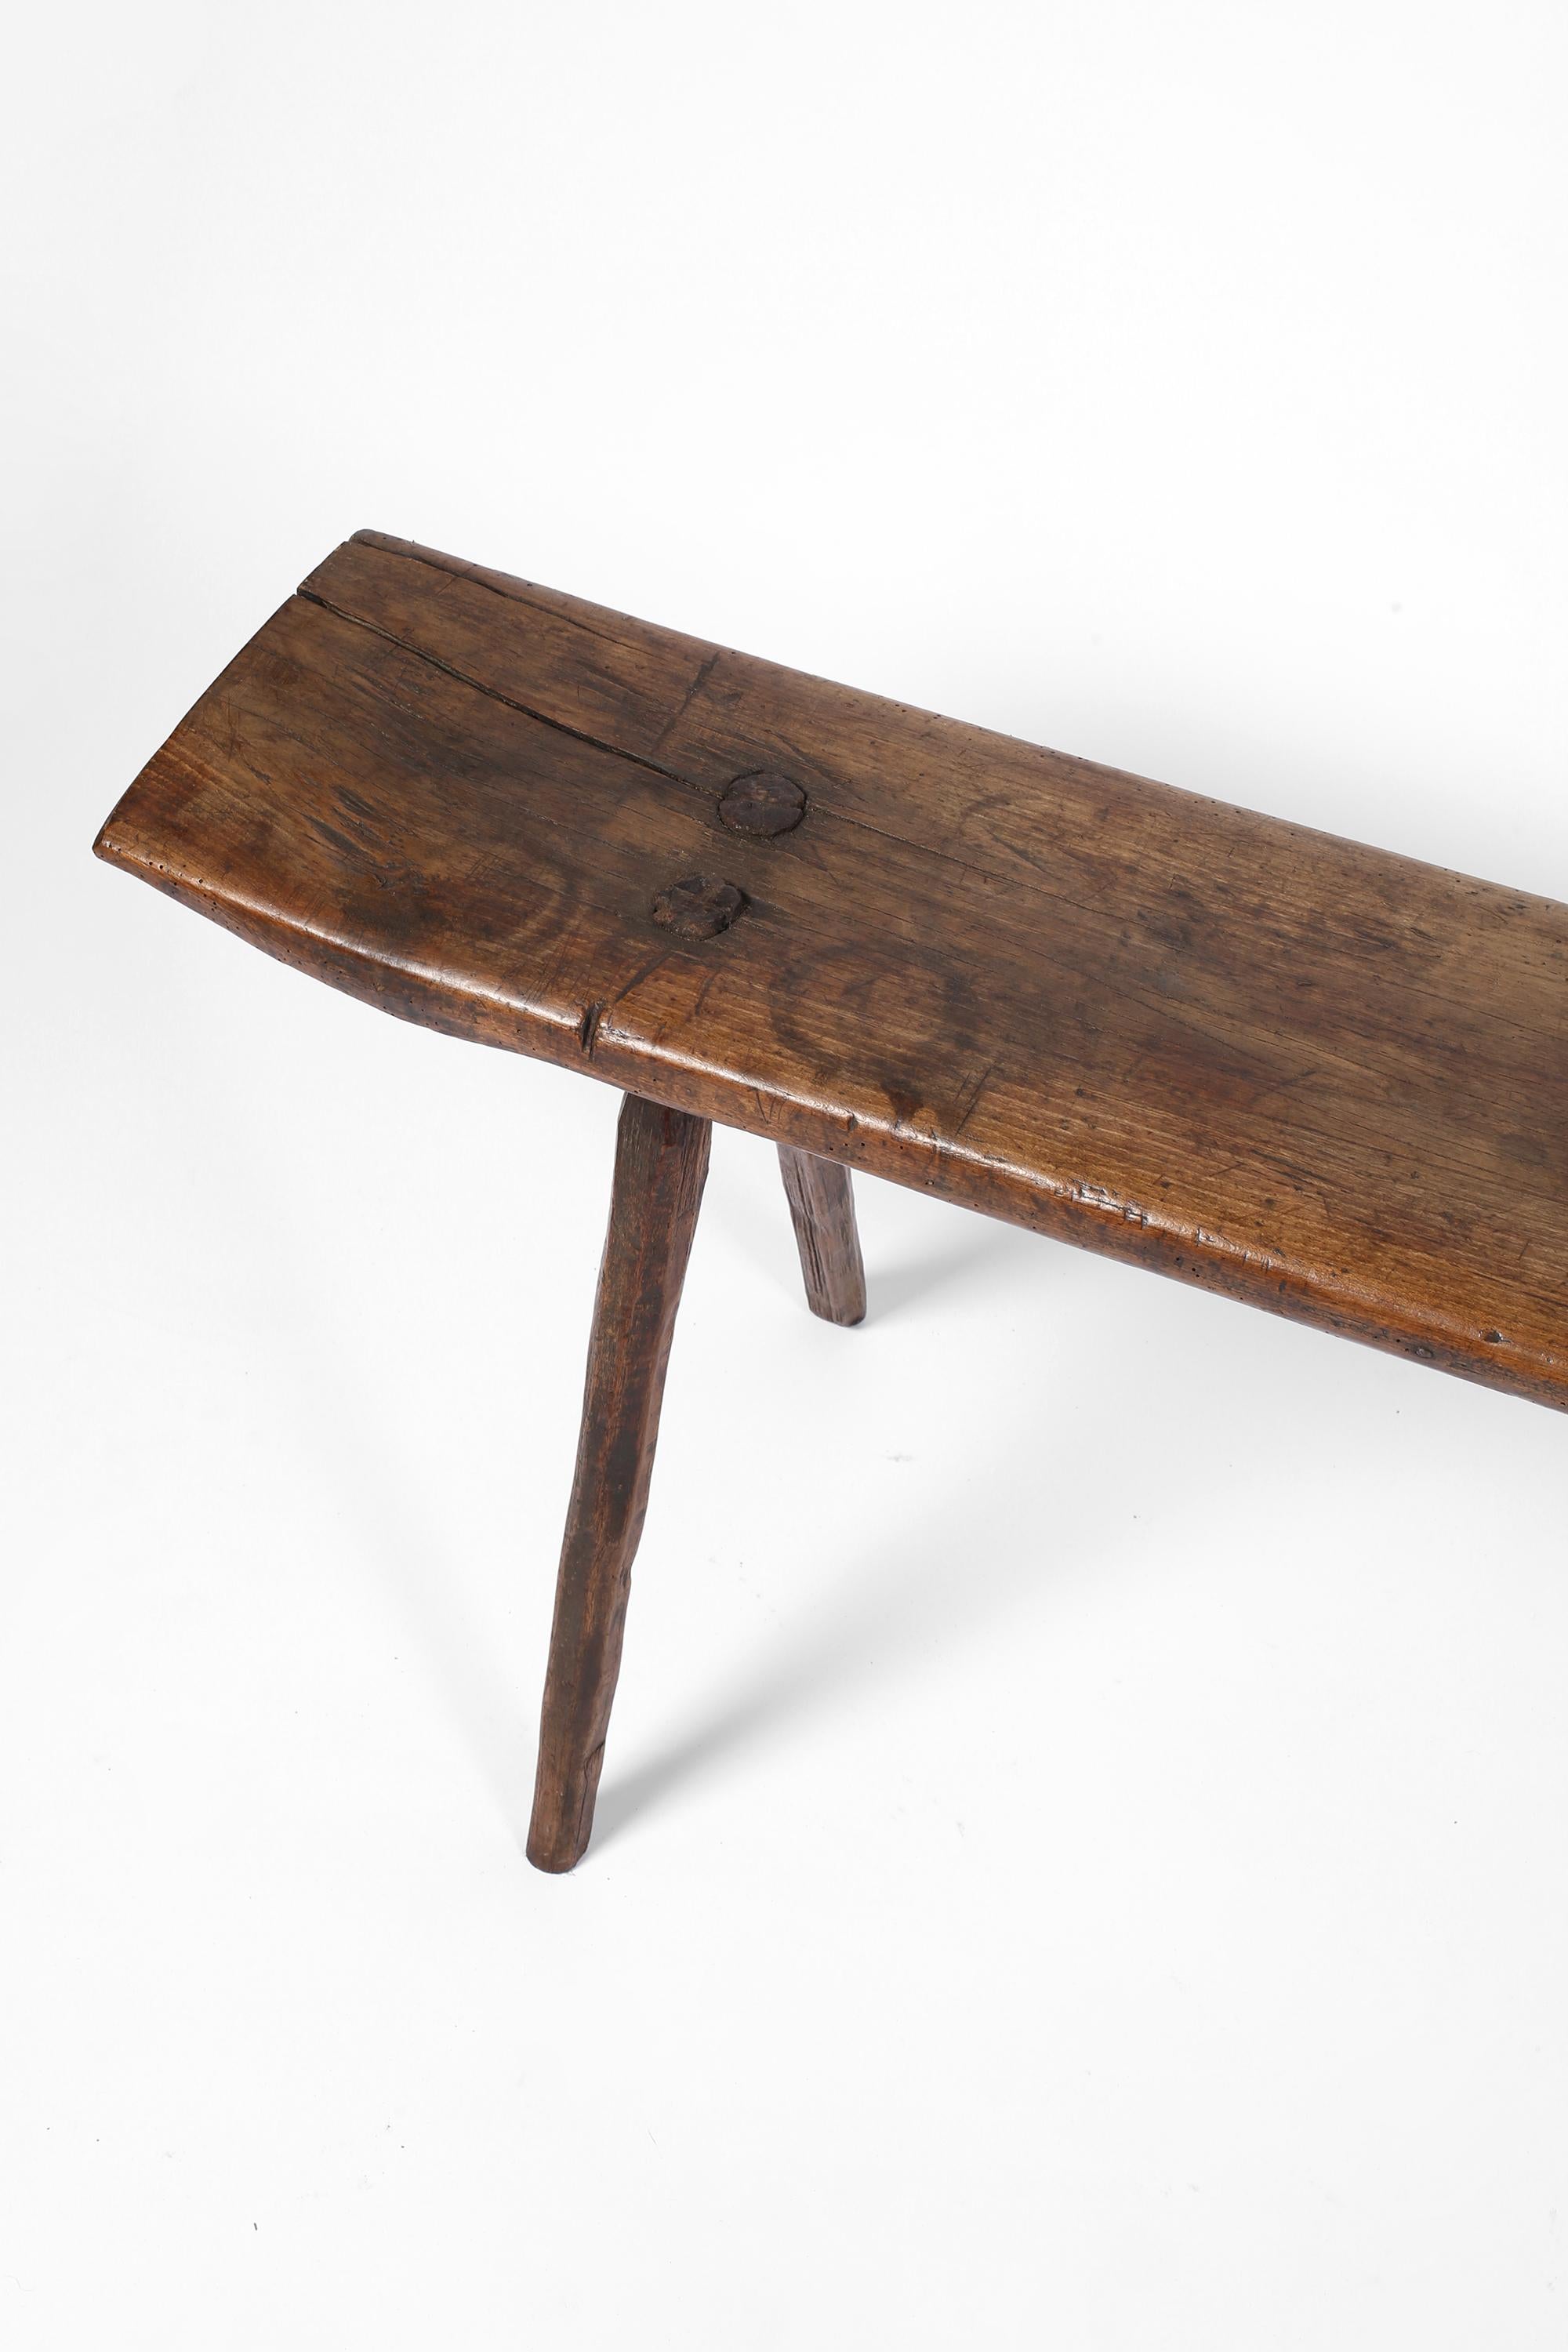 An early 19th century primitive mountain bench constructed from a single plank of richly patinated oak. Retaining its original whittled and attractively splayed legs, with characterful historic iron staple repairs to each end. Italian, c. 1800.